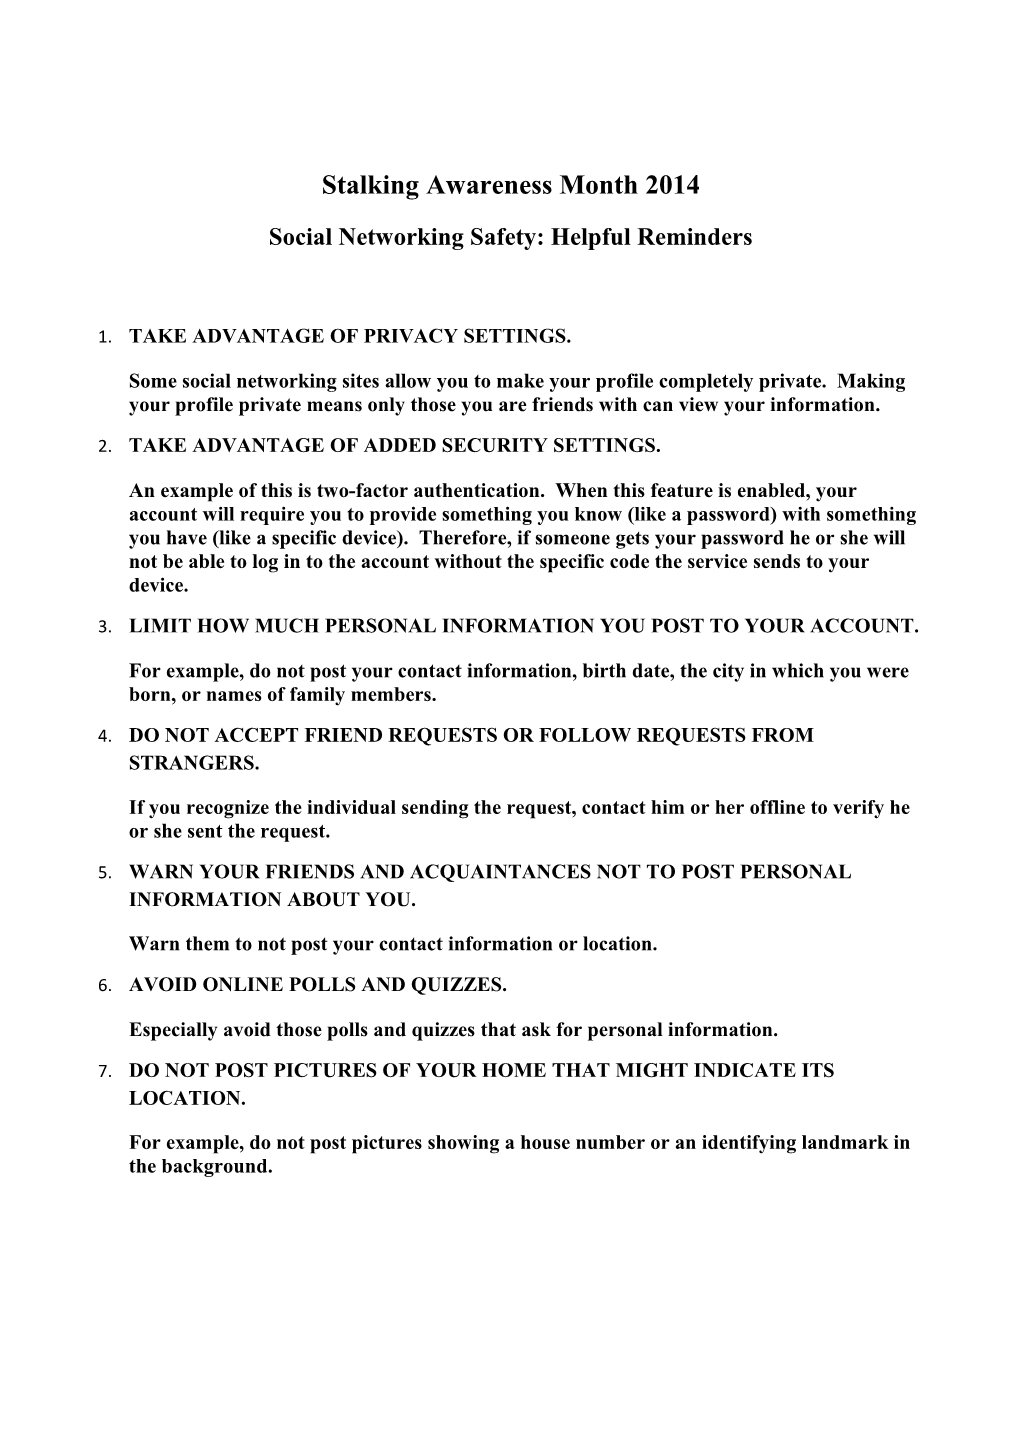 Social Networking Safety: Helpful Reminders